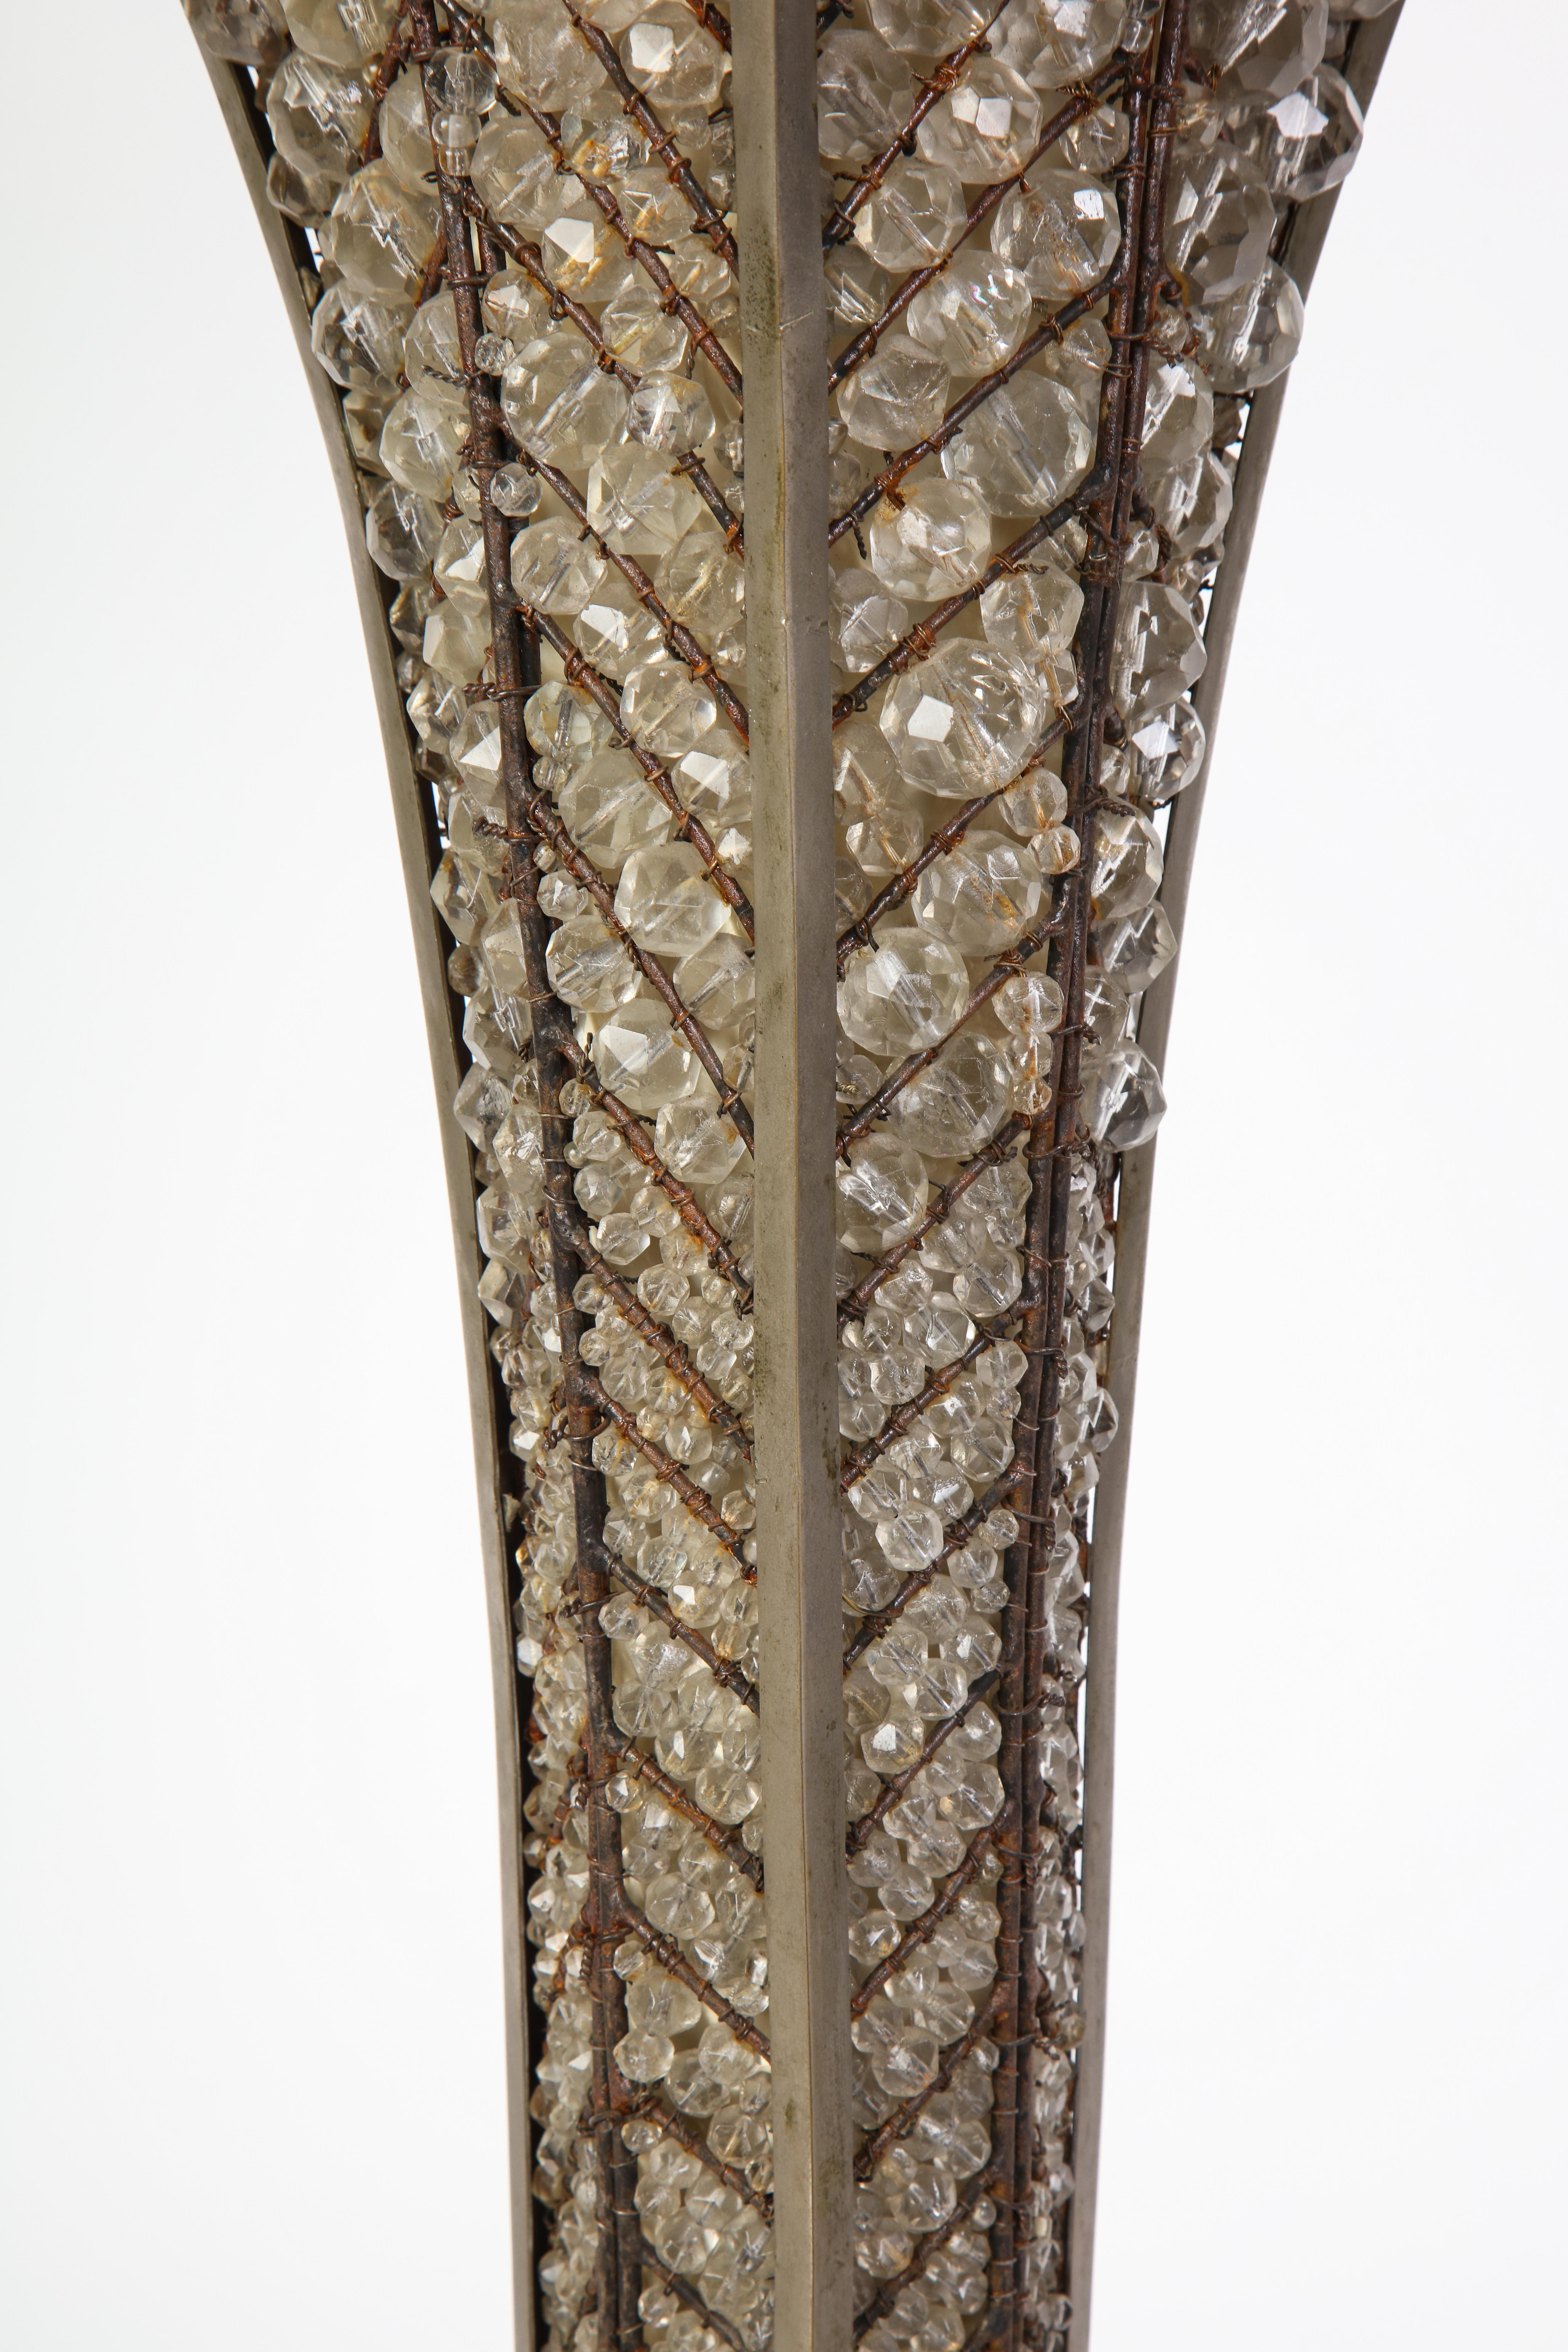 French Beaded Glass Table Lamp, Attributed To Maison Bagues, Circa 1925 In Good Condition For Sale In New York, NY